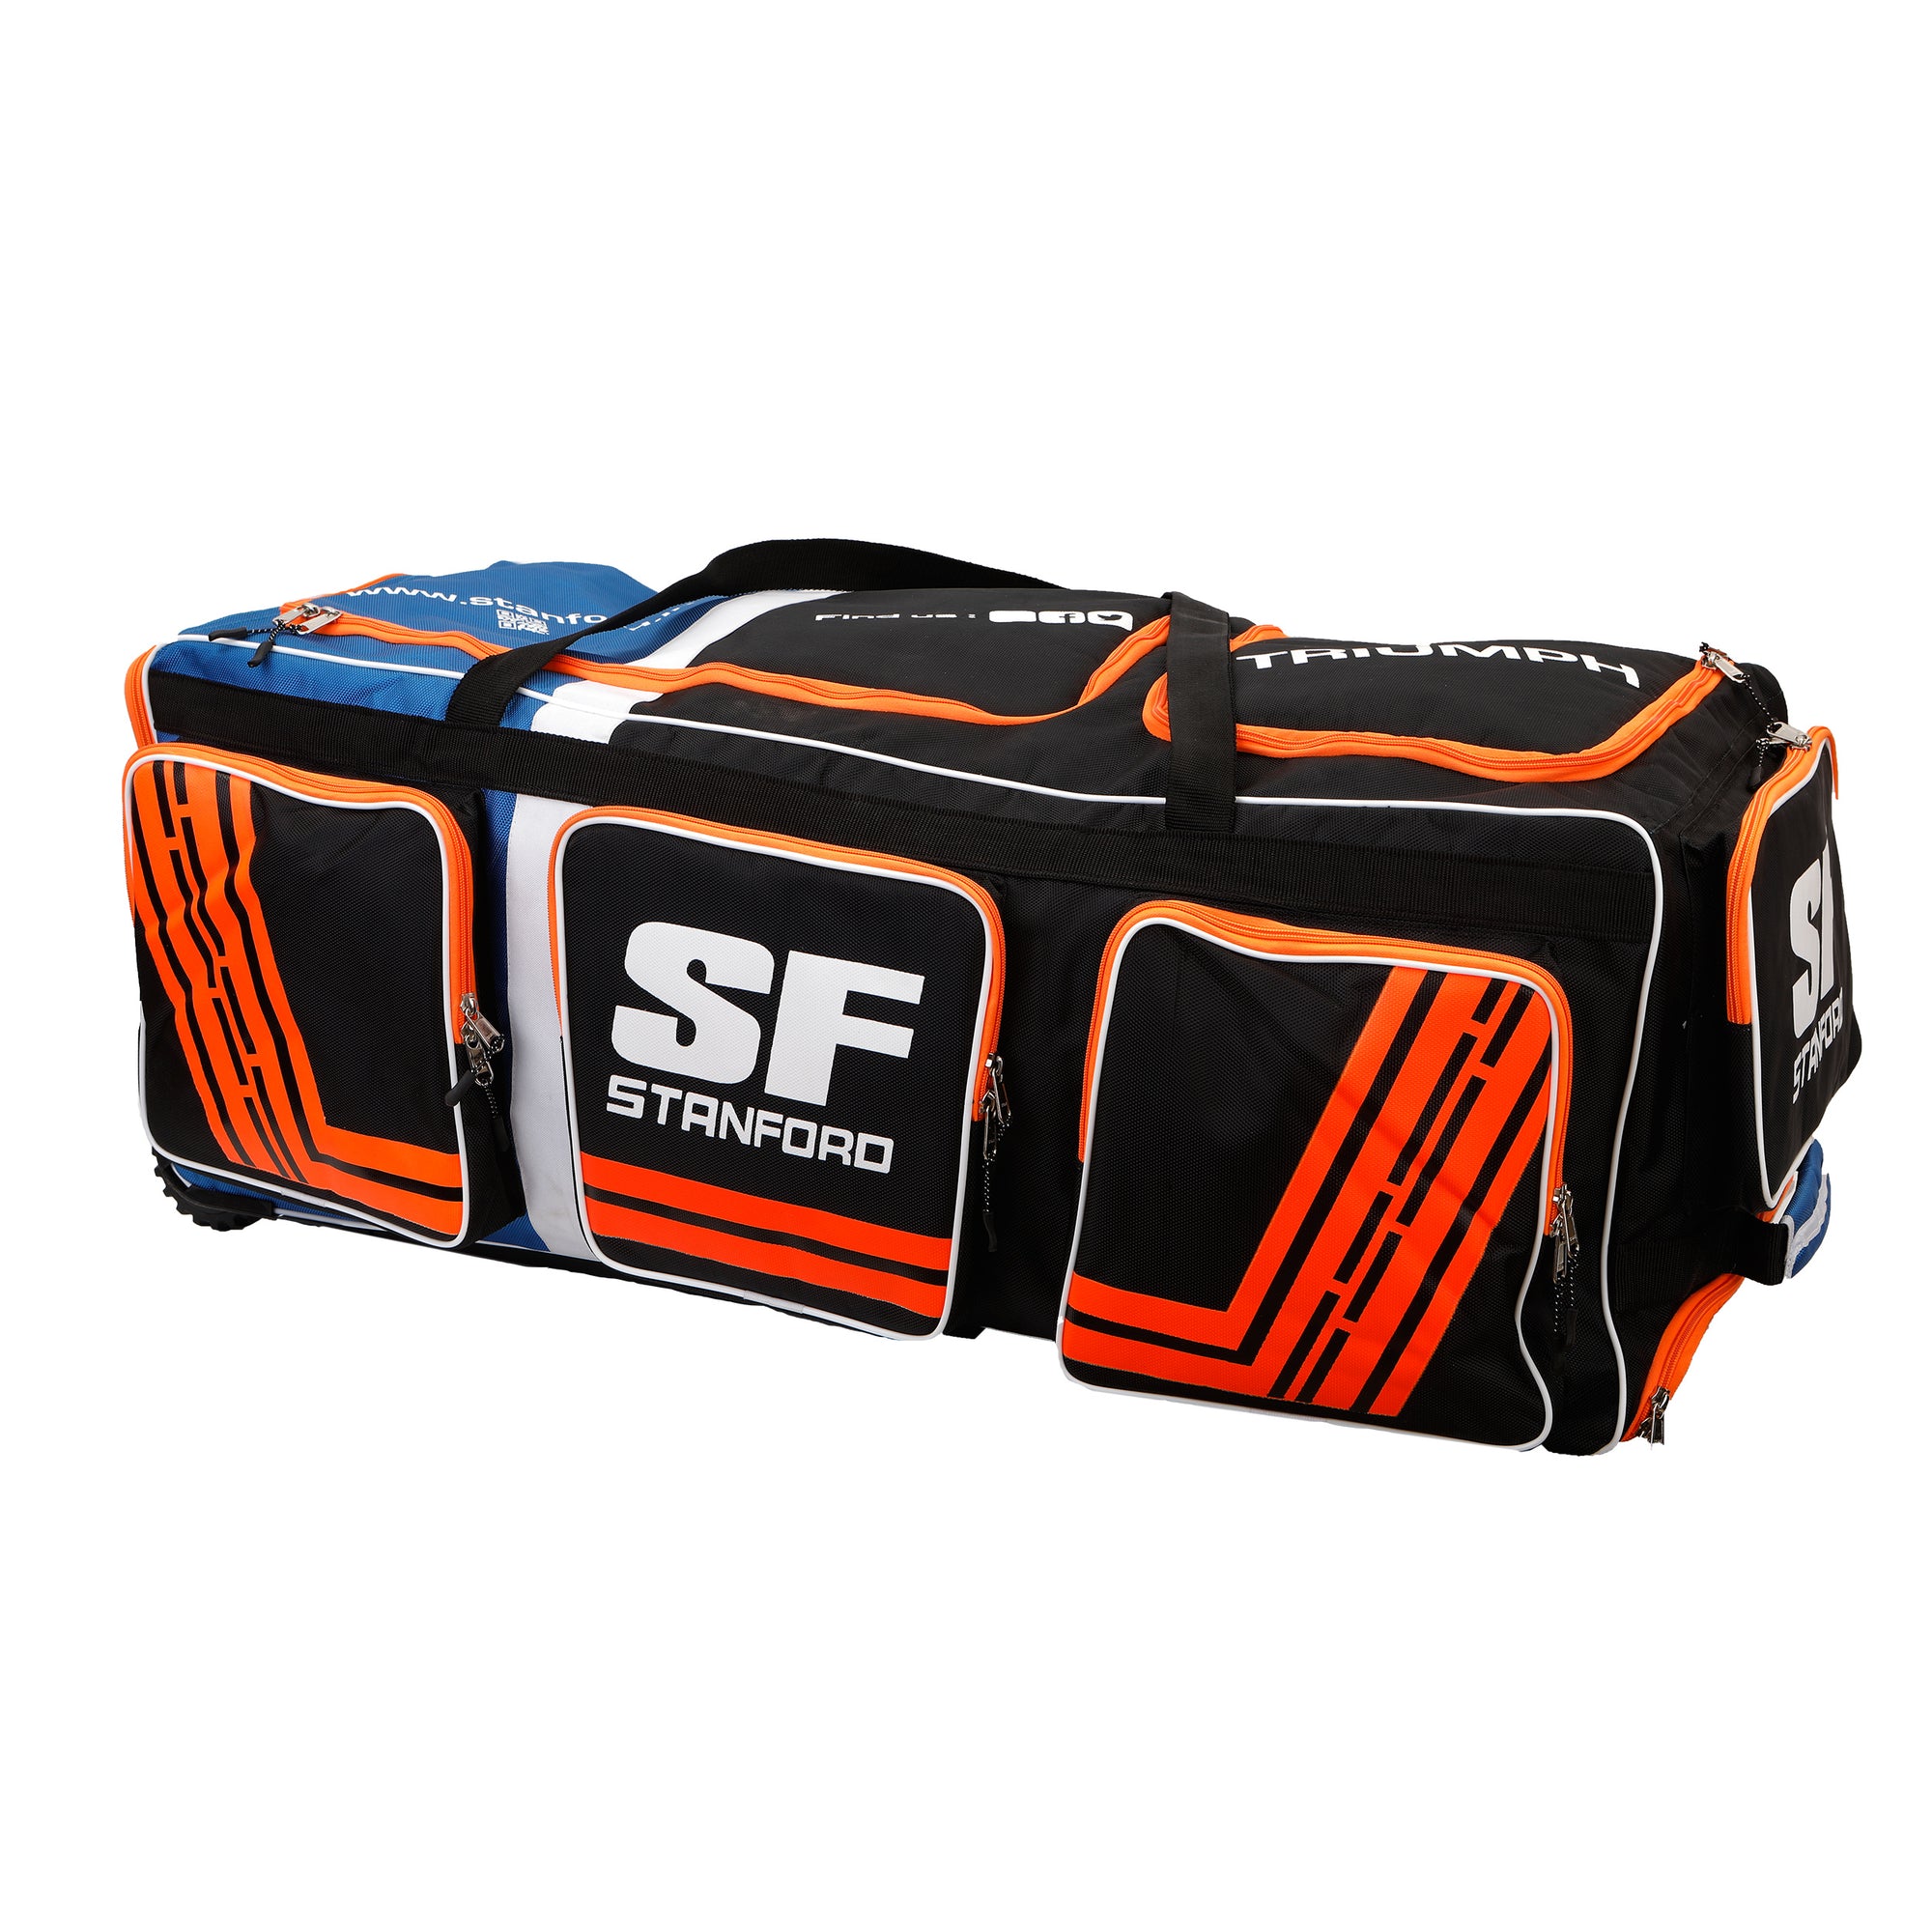 SS Force Duffle Cricket Kit Bag With Wheels | Buy Online, Shop India |  Price, Photos, Detailed Features |